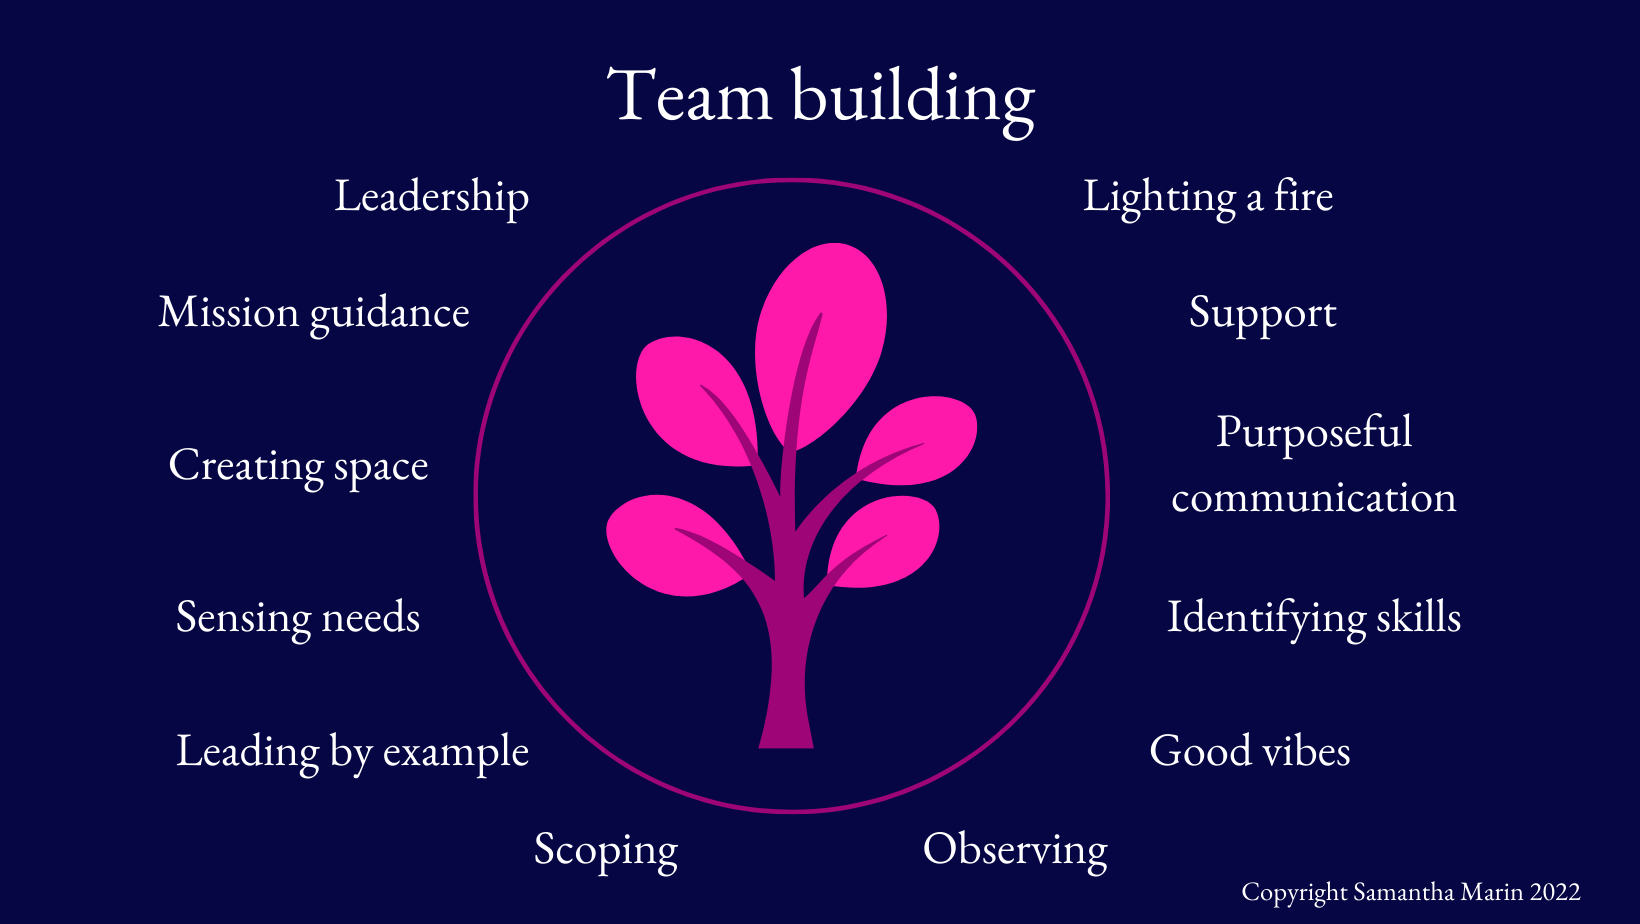 Team building requires so many unique traits that it might be the most difficult and time-consuming skill to cultivate.